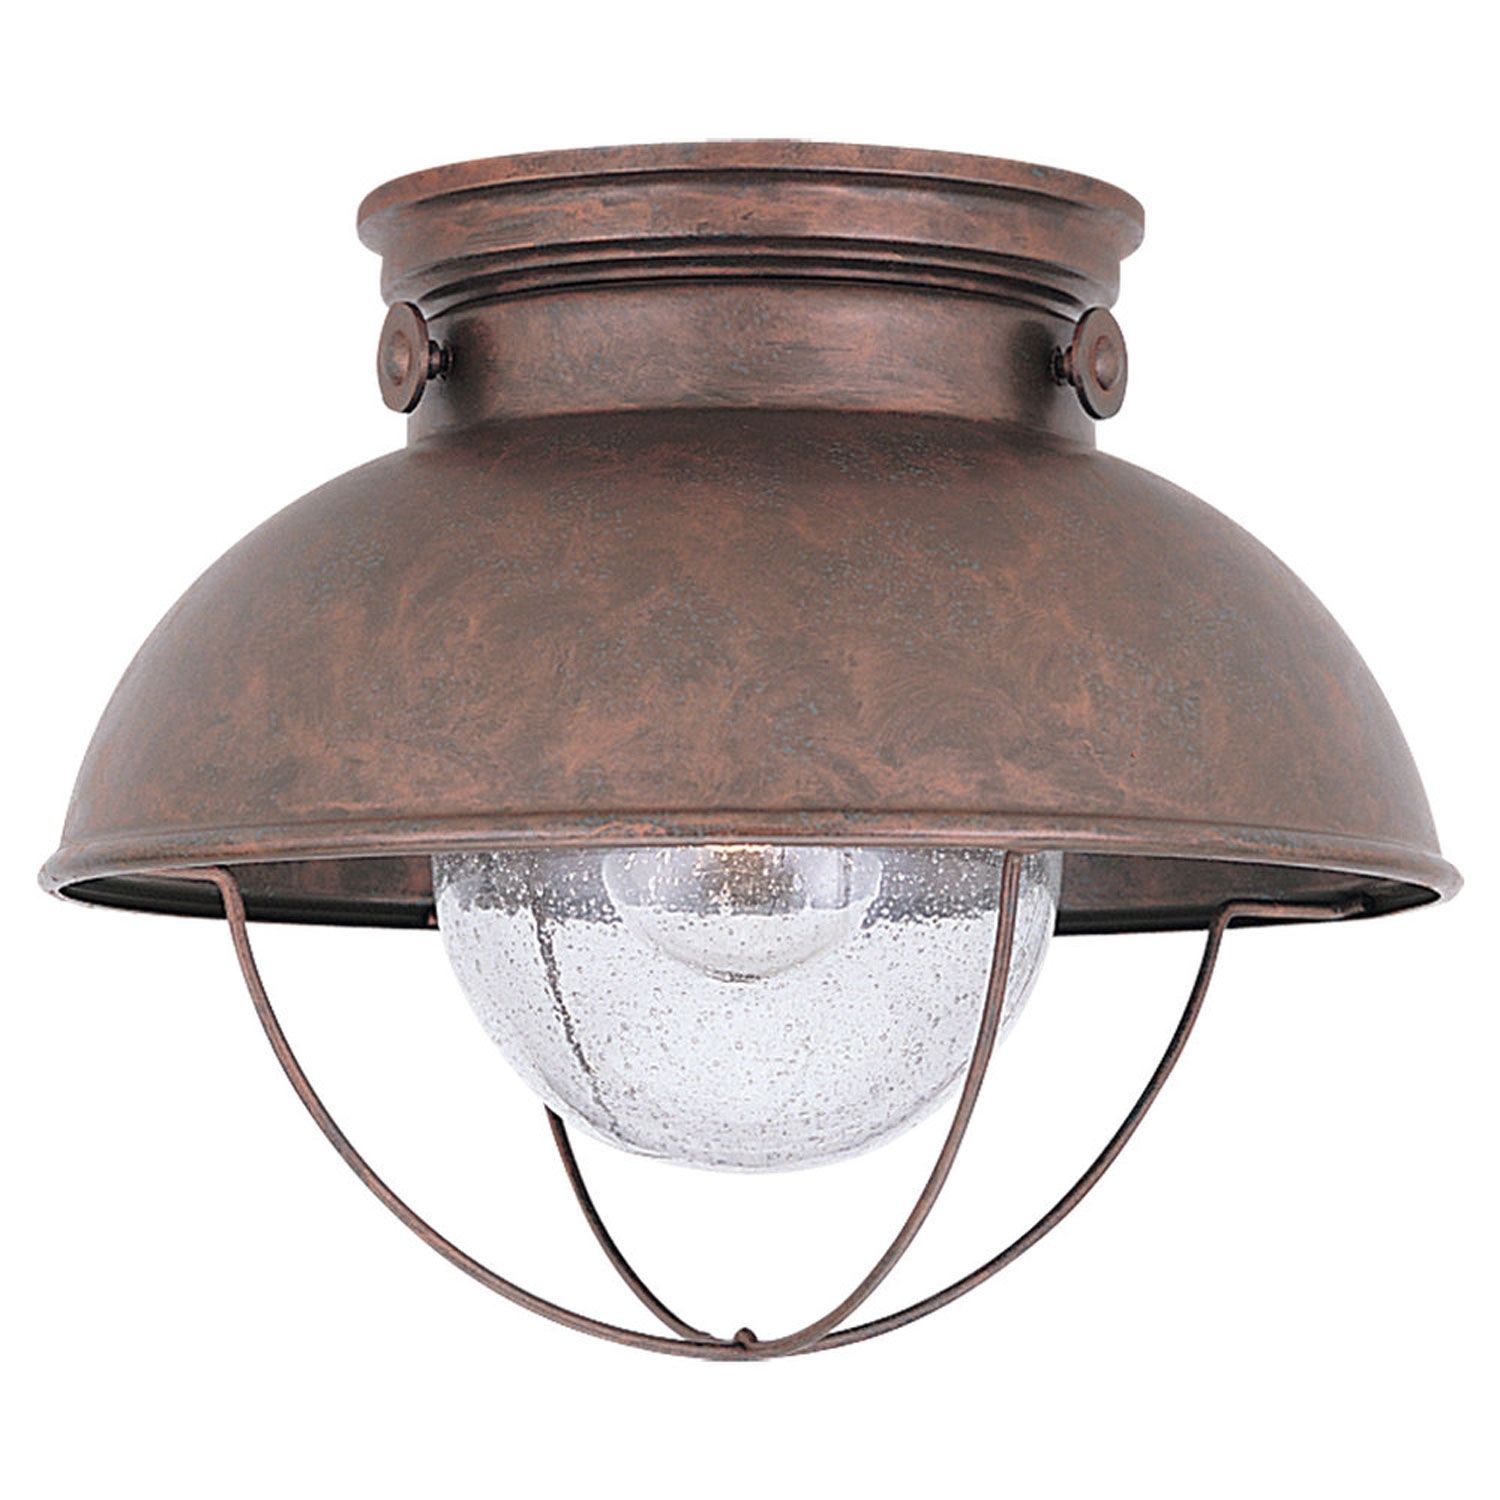 Sea Gull Lighting Sebring Weathered Copper Outdoor Ceiling Light Intended For Cheap Outdoor Ceiling Lights (View 7 of 15)